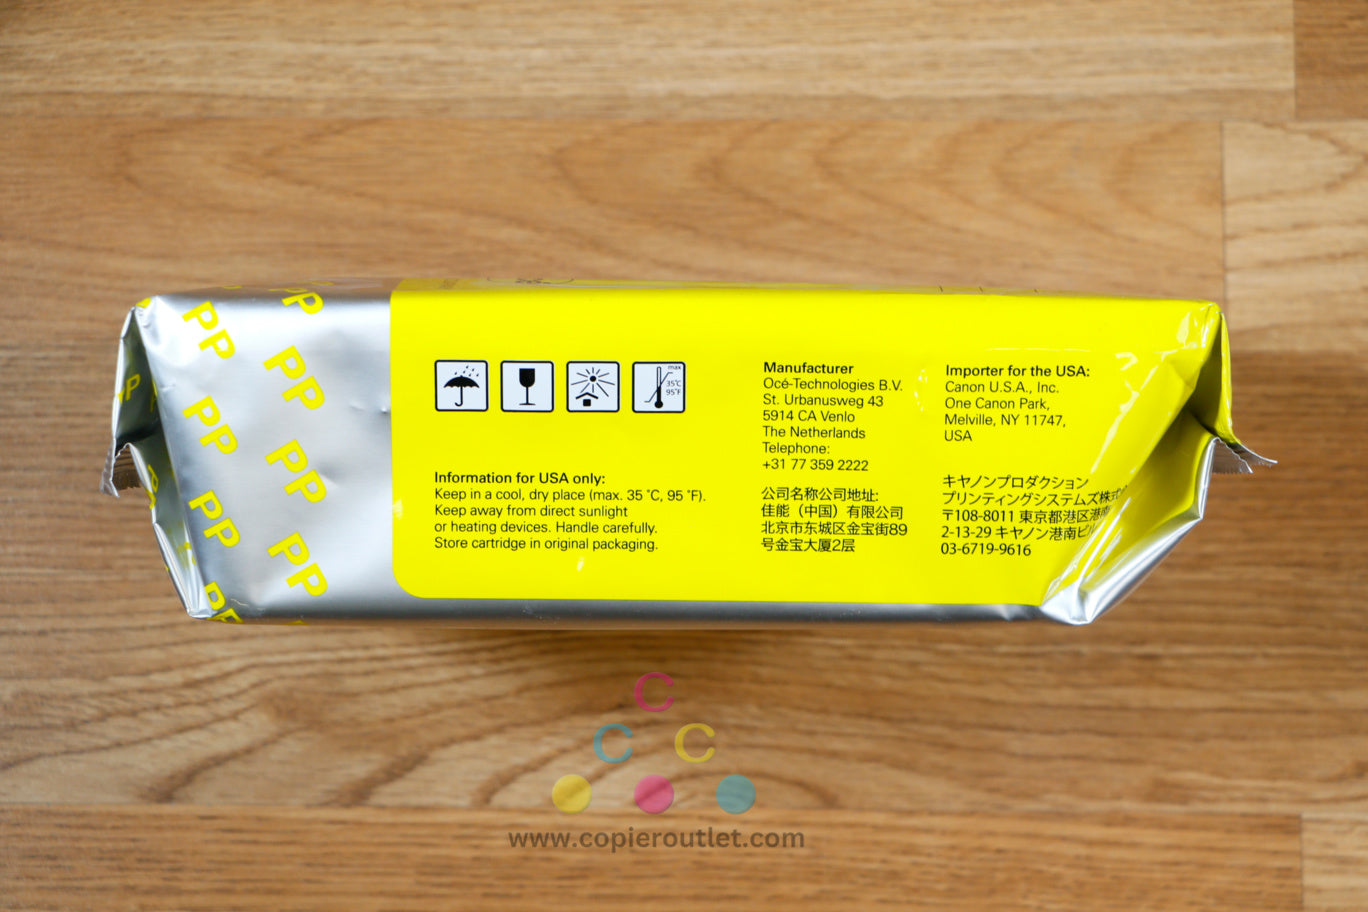 Oce Colorwave 600 1060099516 Yellow Toner Pearls PP 500gms *Same Day Shipping!!